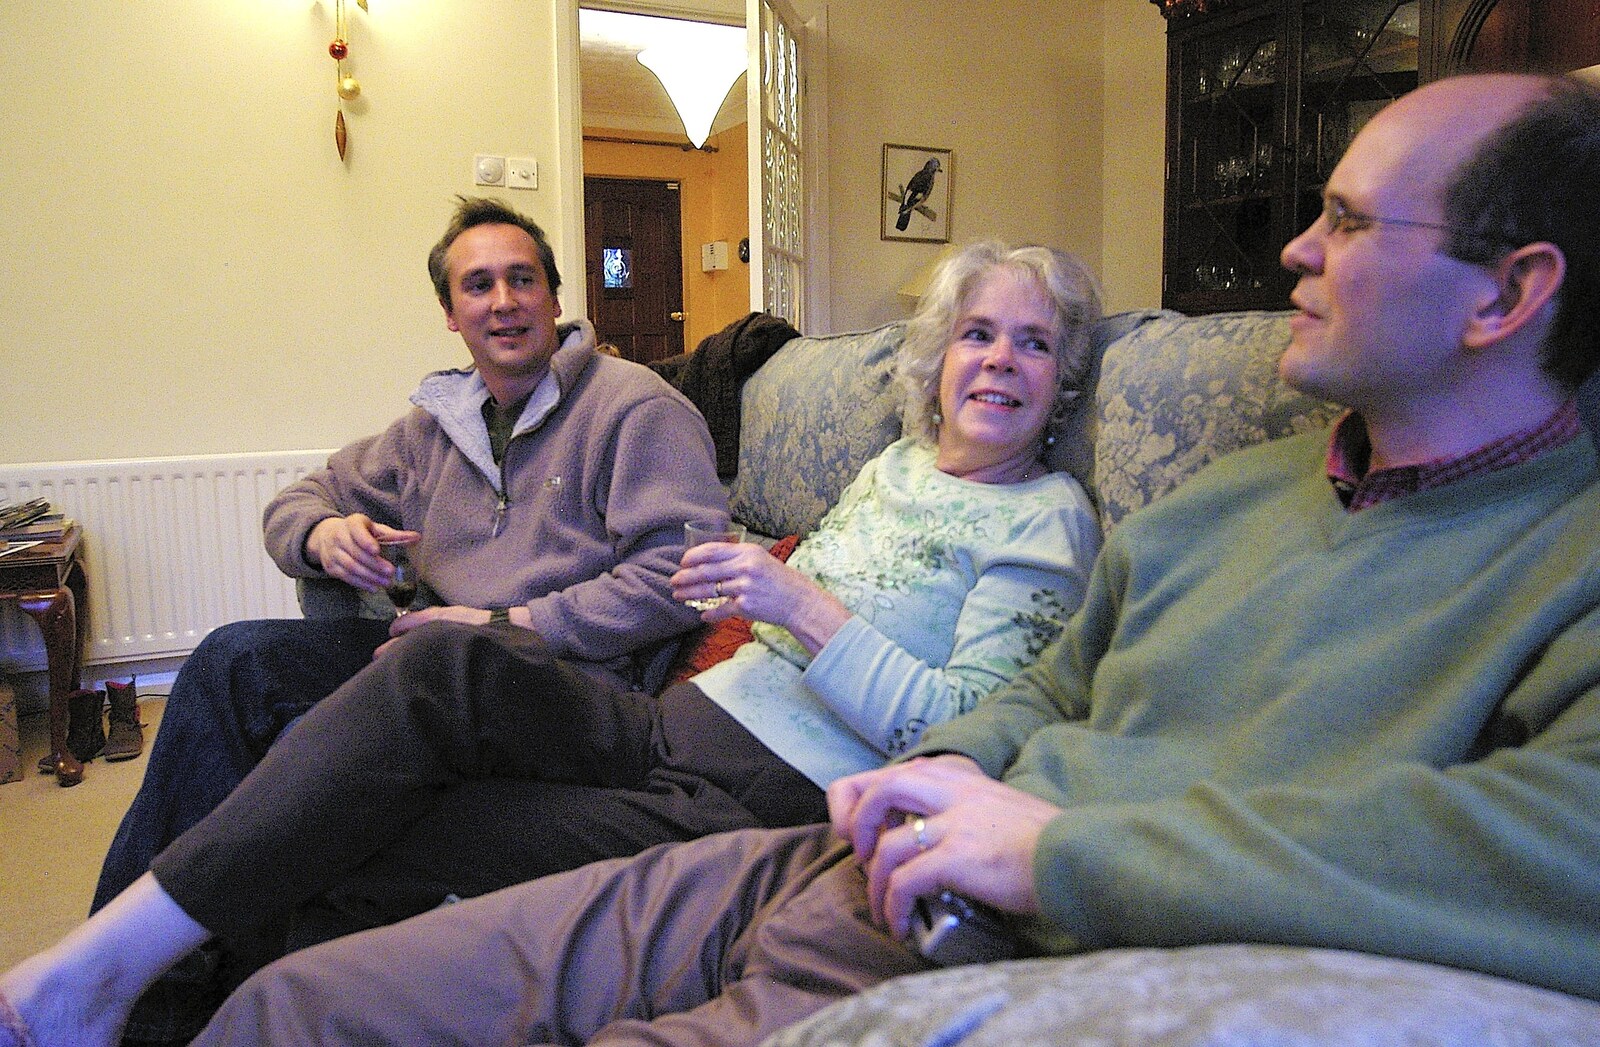 Chris, Bernice and Phil from Boxing Day Miscellany, Hordle and Barton-on-Sea, Hampshire - 26th December 2005